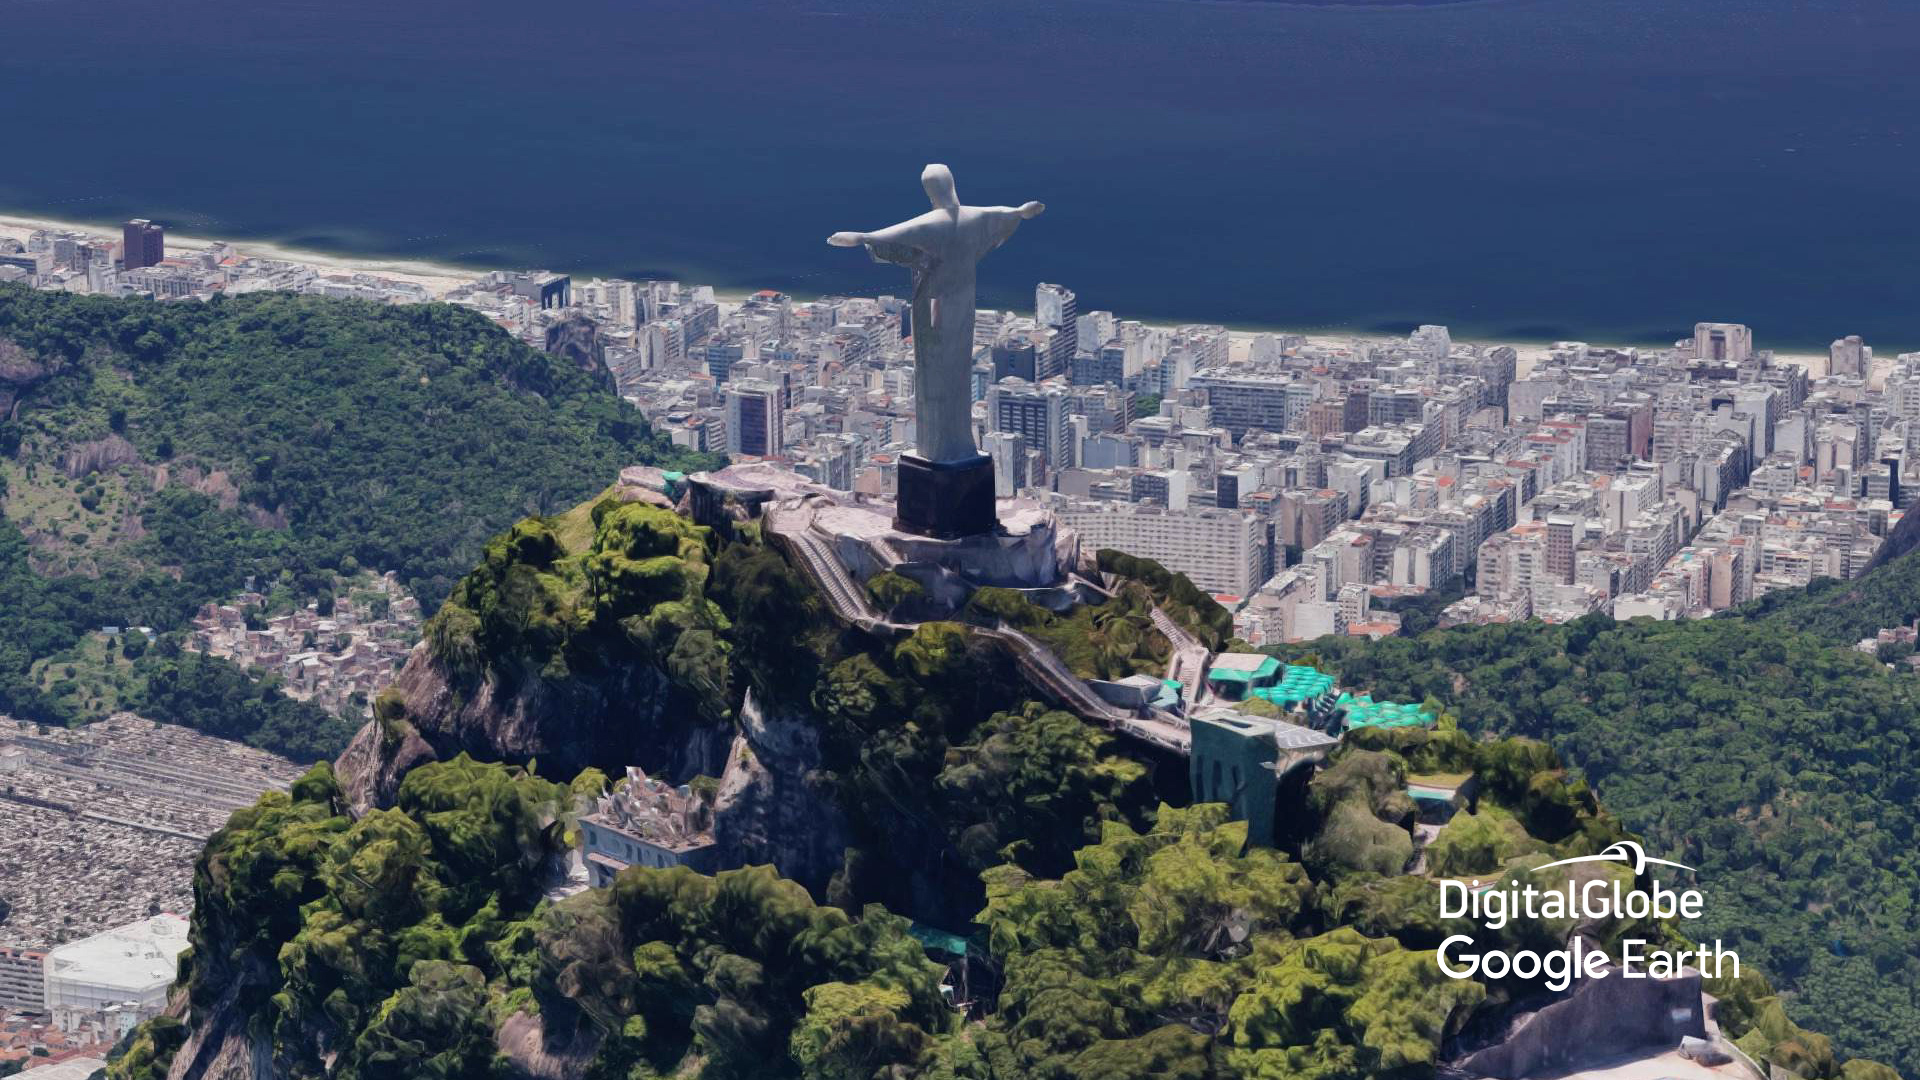 Google Earth aerial views of Olympic venues in Rio